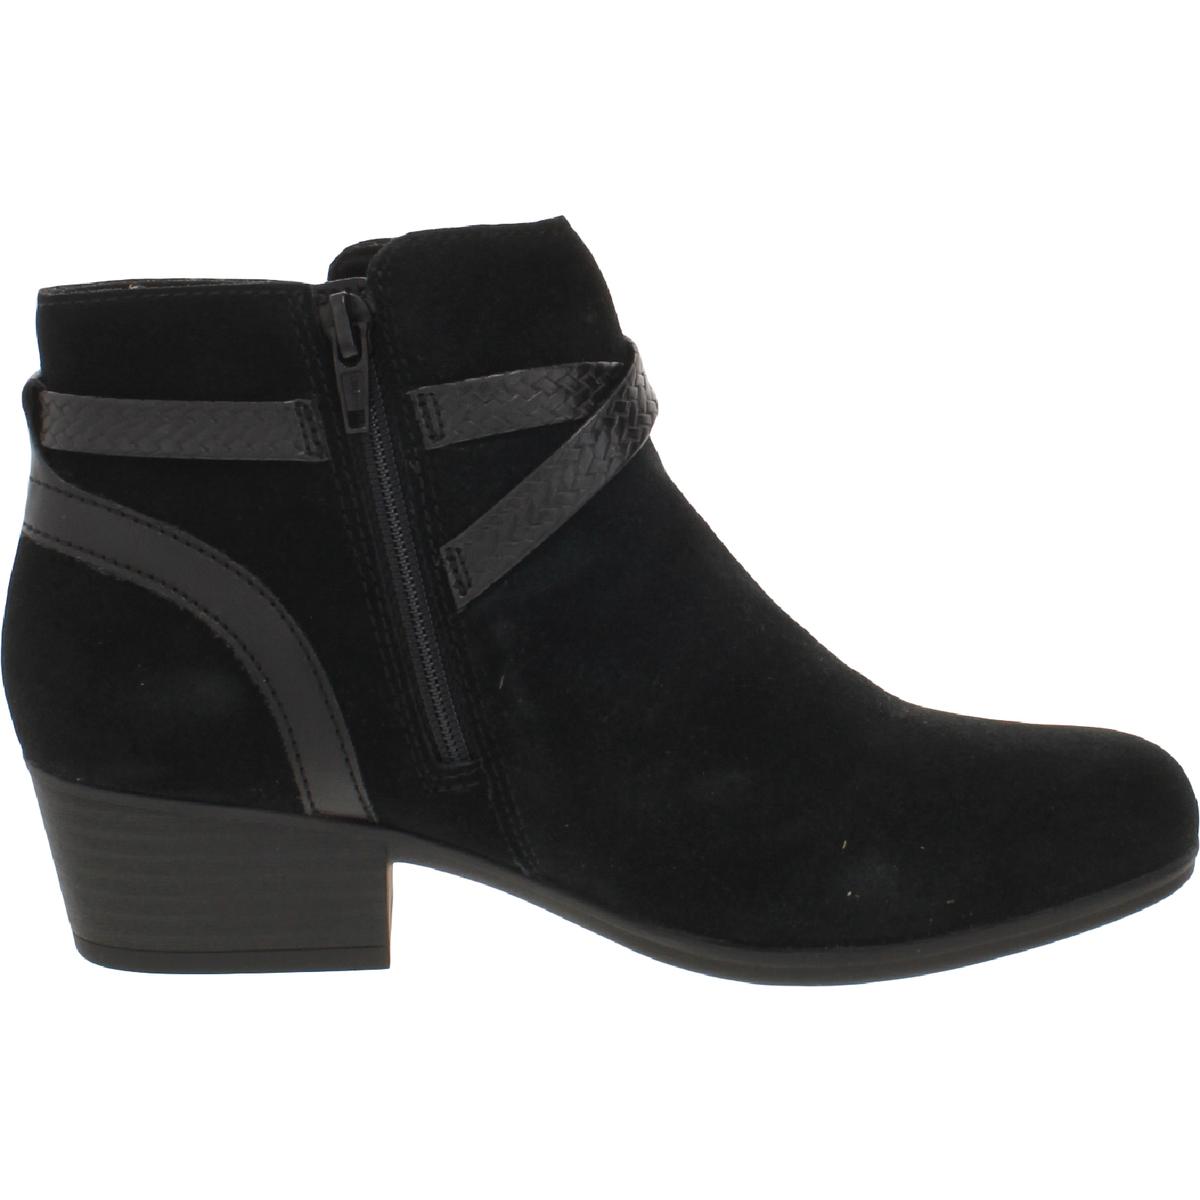 Clarks Adreena Hi Womens Suede Round Toe Ankle Boots